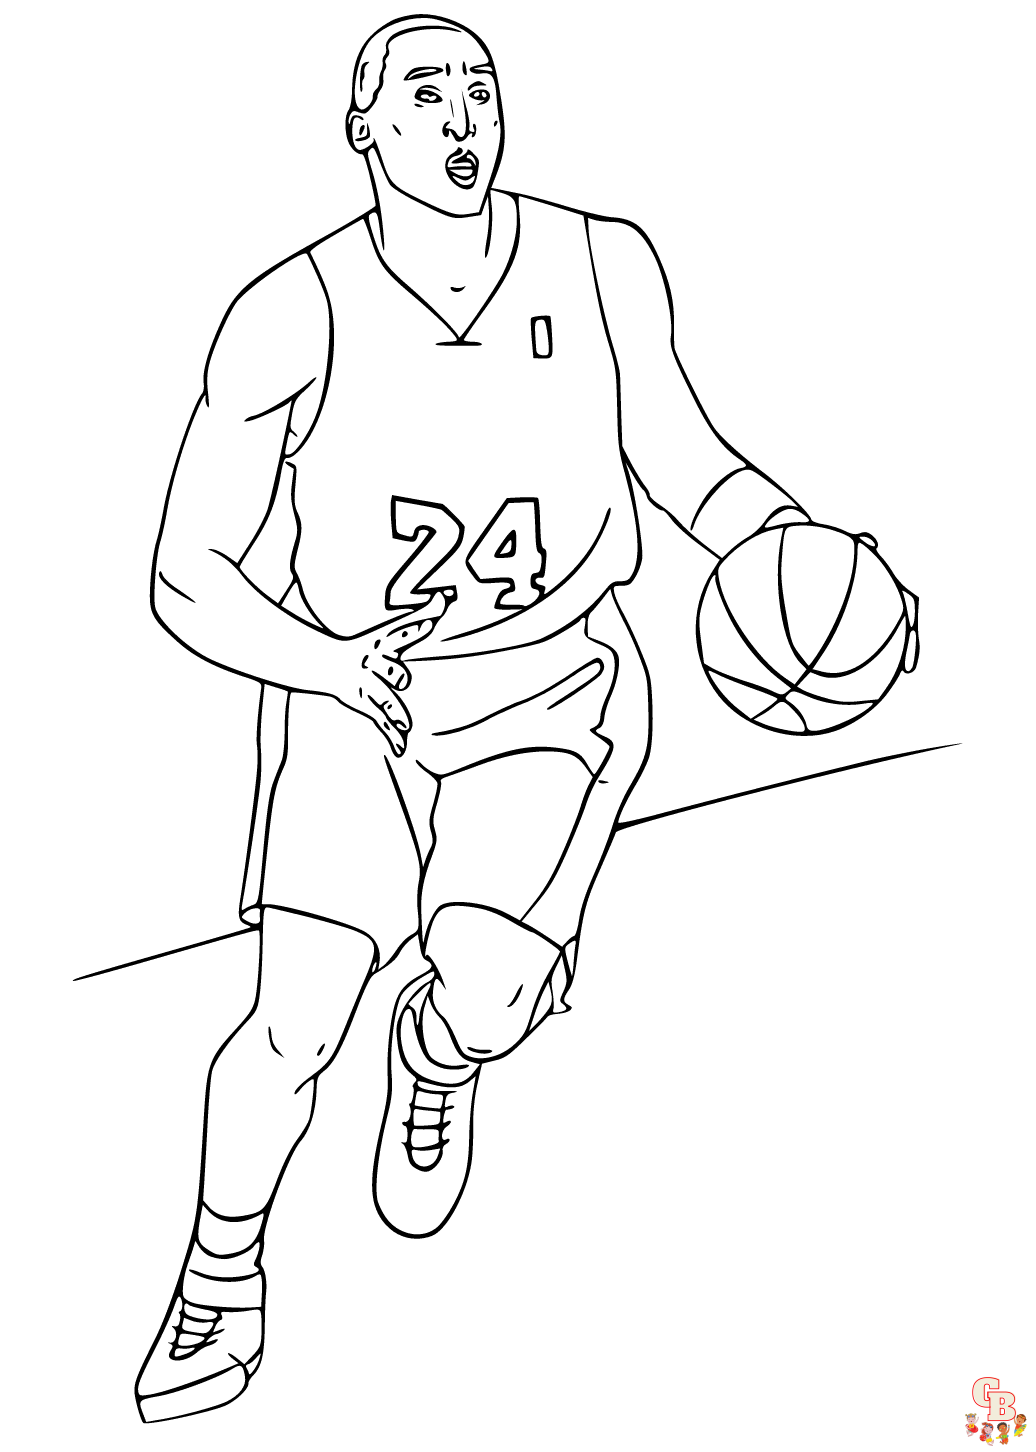 Printable kobe bryant coloring pages free for kids and adults